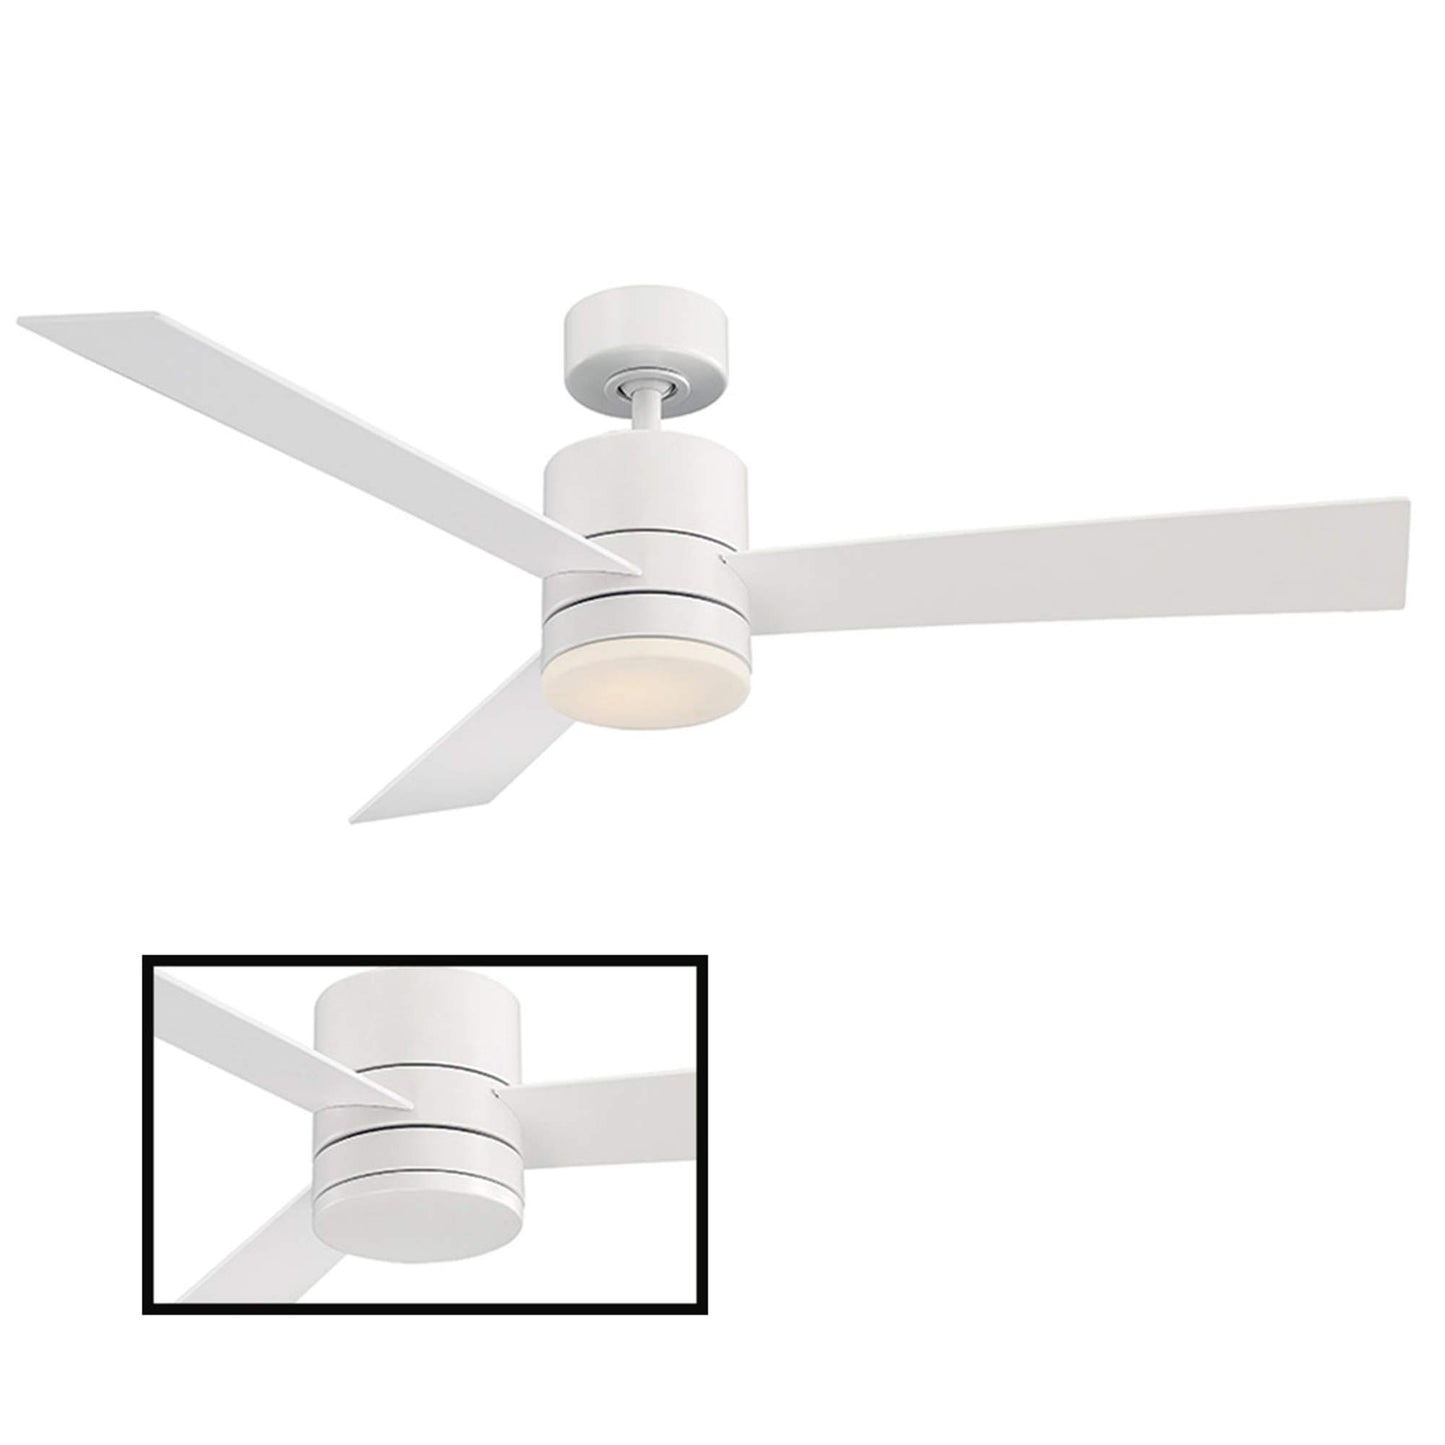 Axis Smart Indoor and Outdoor 3-Blade Ceiling Fan 52in Matte White with 2700K LED Light Kit and Remote Control works with Alexa, Google Assistant, Samsung Things, and iOS or Android App - Like New